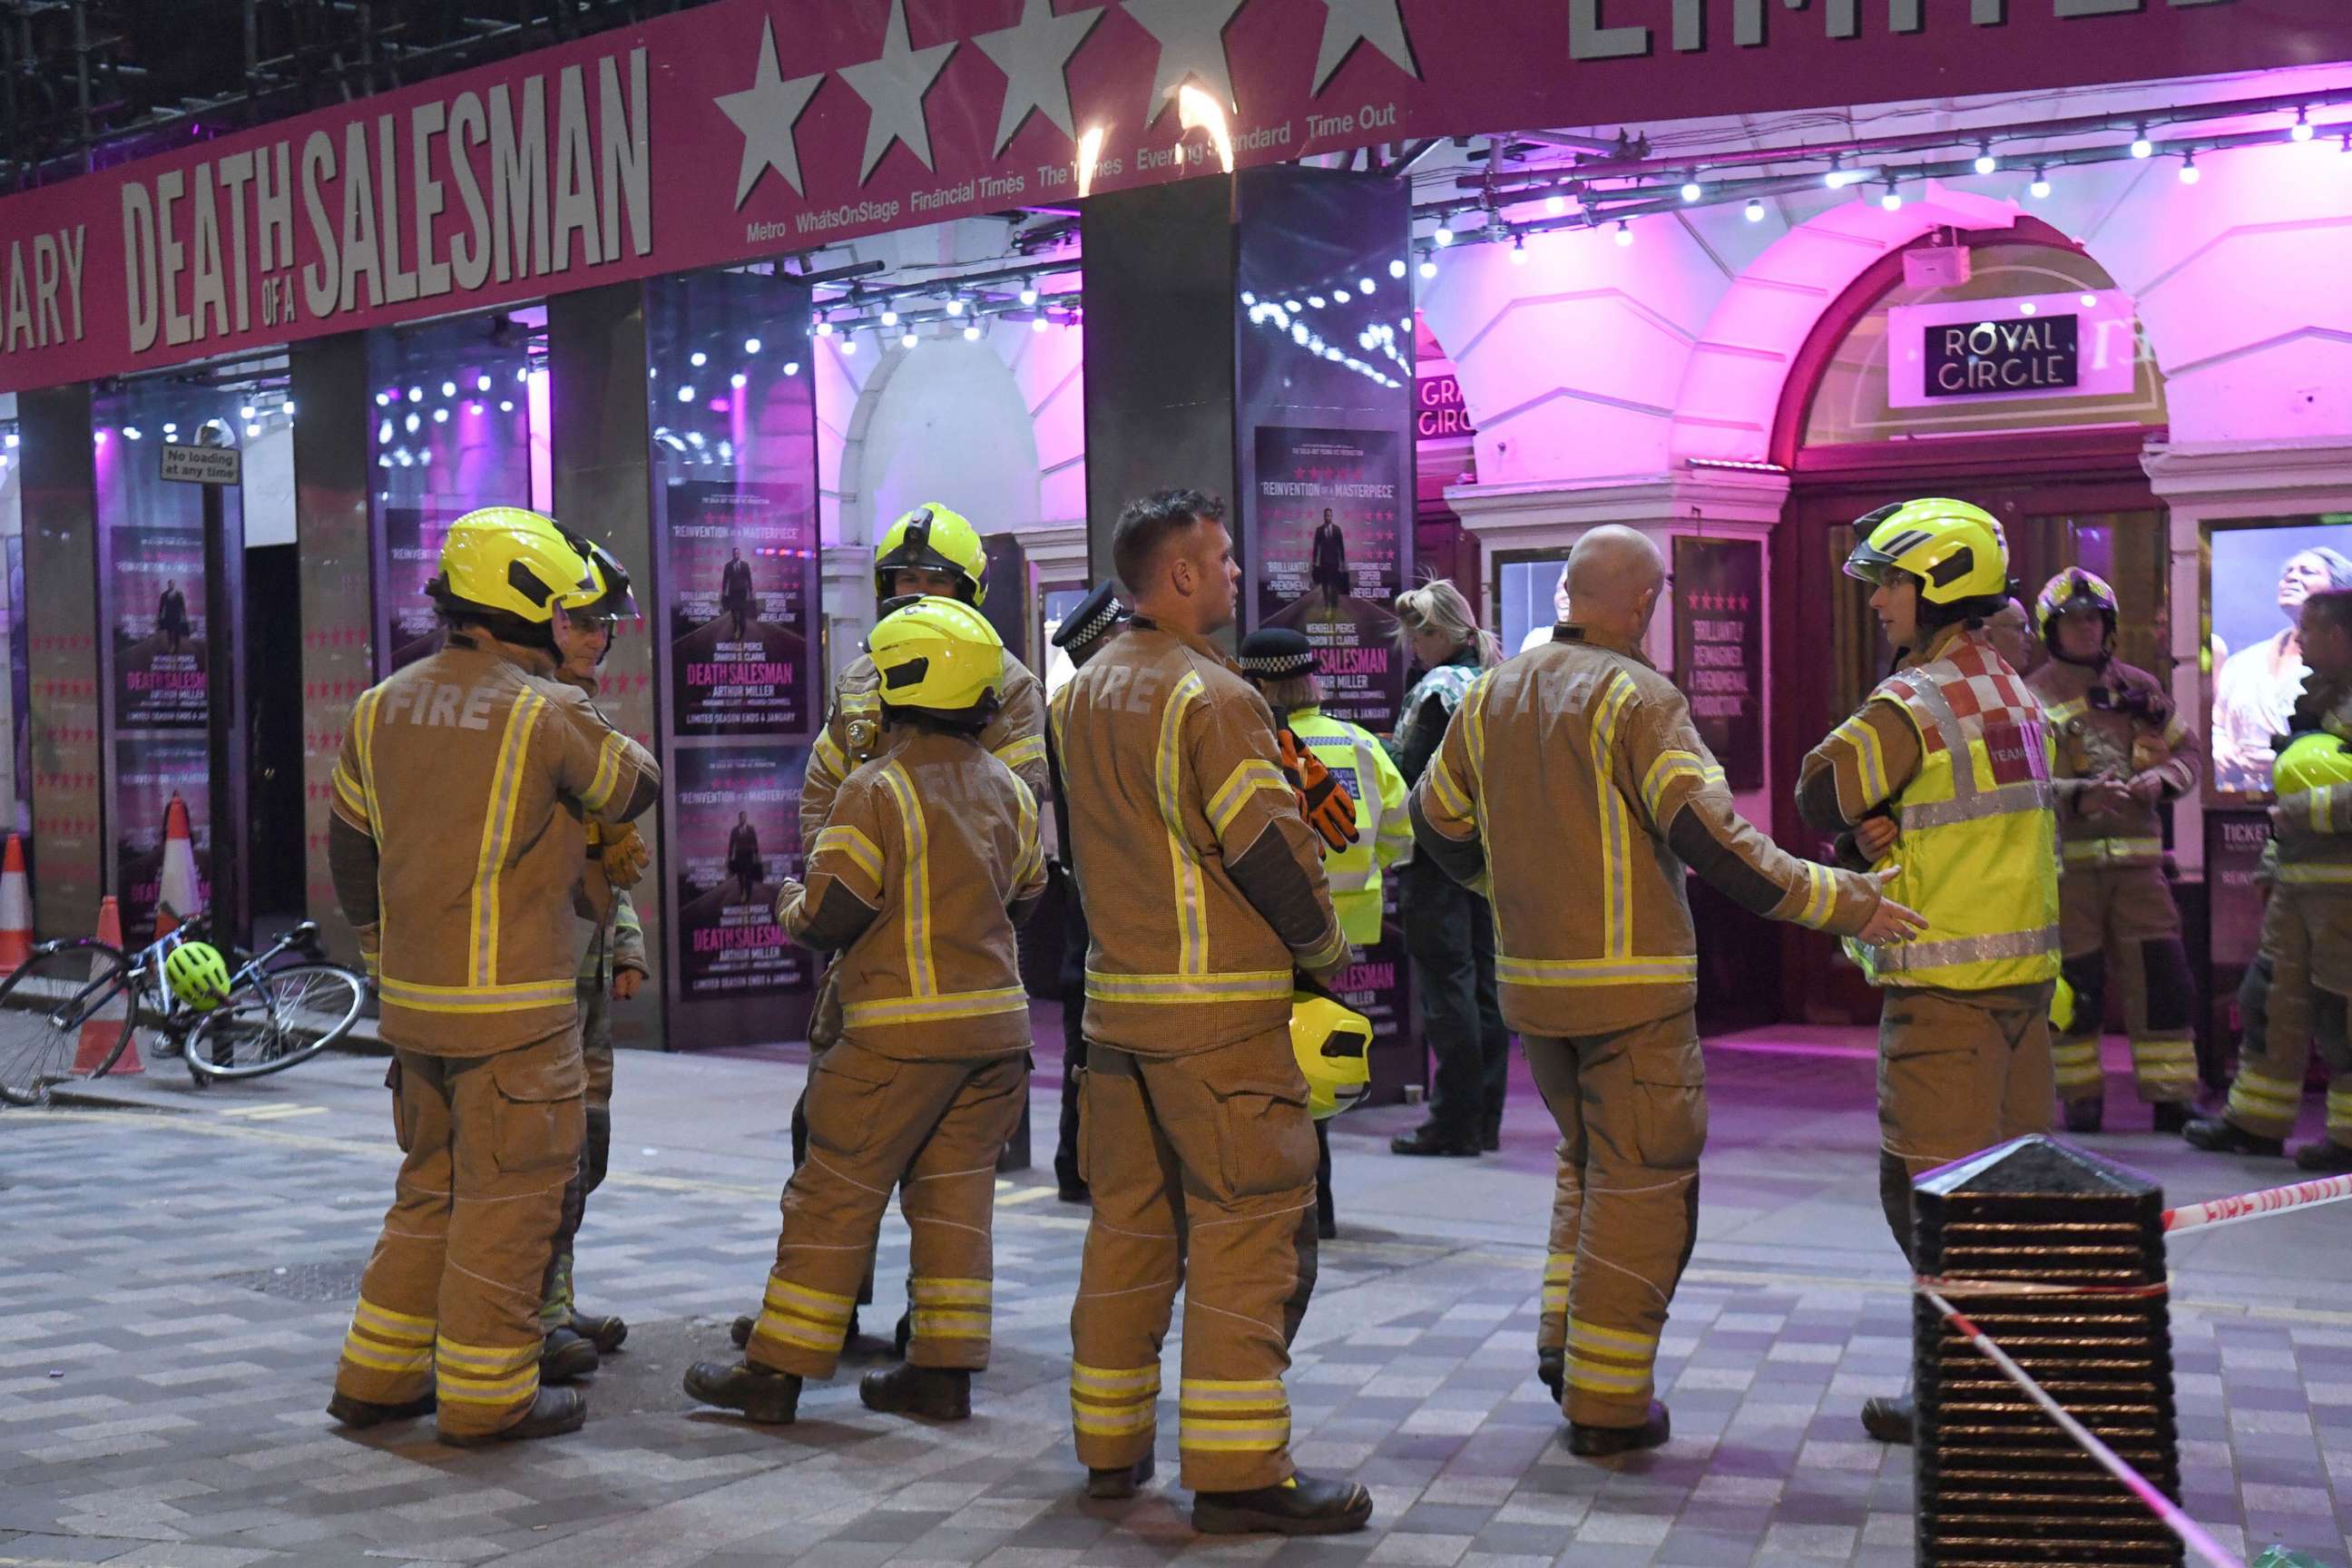 PHOTO: Fire fighters outside the Piccadilly Theatre in London, after it was evacuated when part of the ceiling fell into the auditorium during a performance of the play Death of a Salesman, Wednesday Nov. 6, 2019. (Kirsty O'Connor/PA via AP)